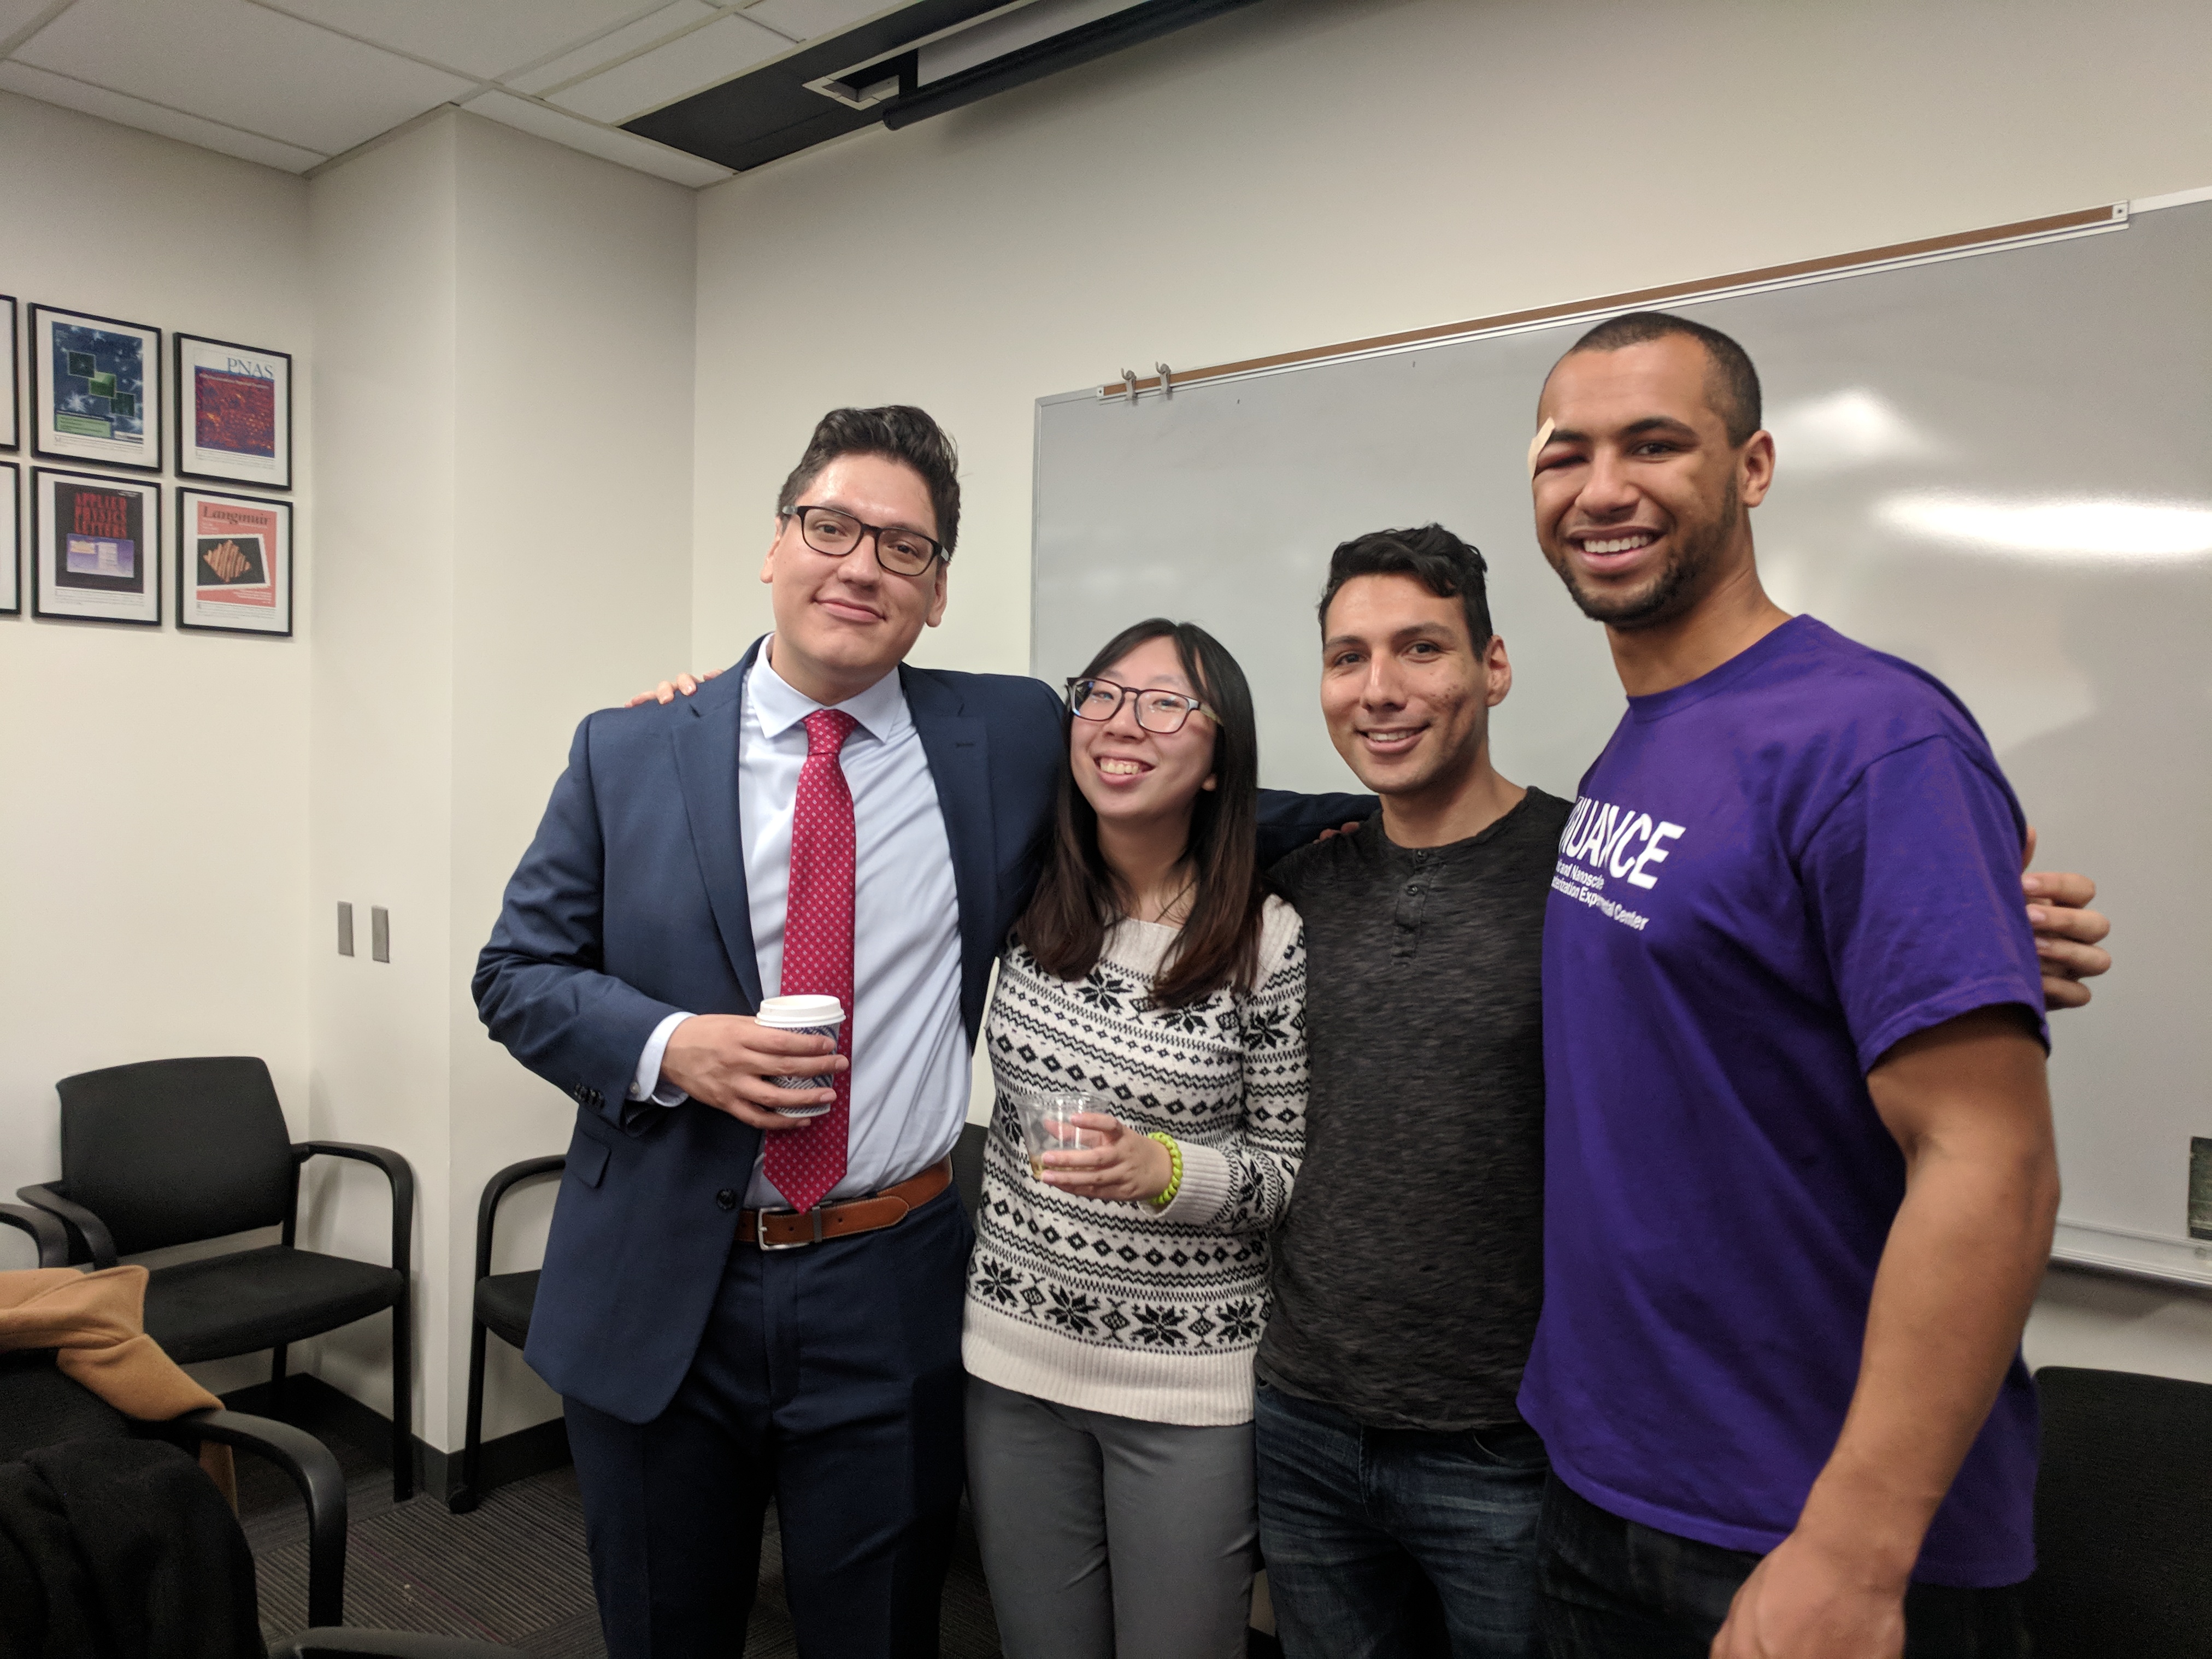 Fernando celebrated with VPD Group members following his defense.